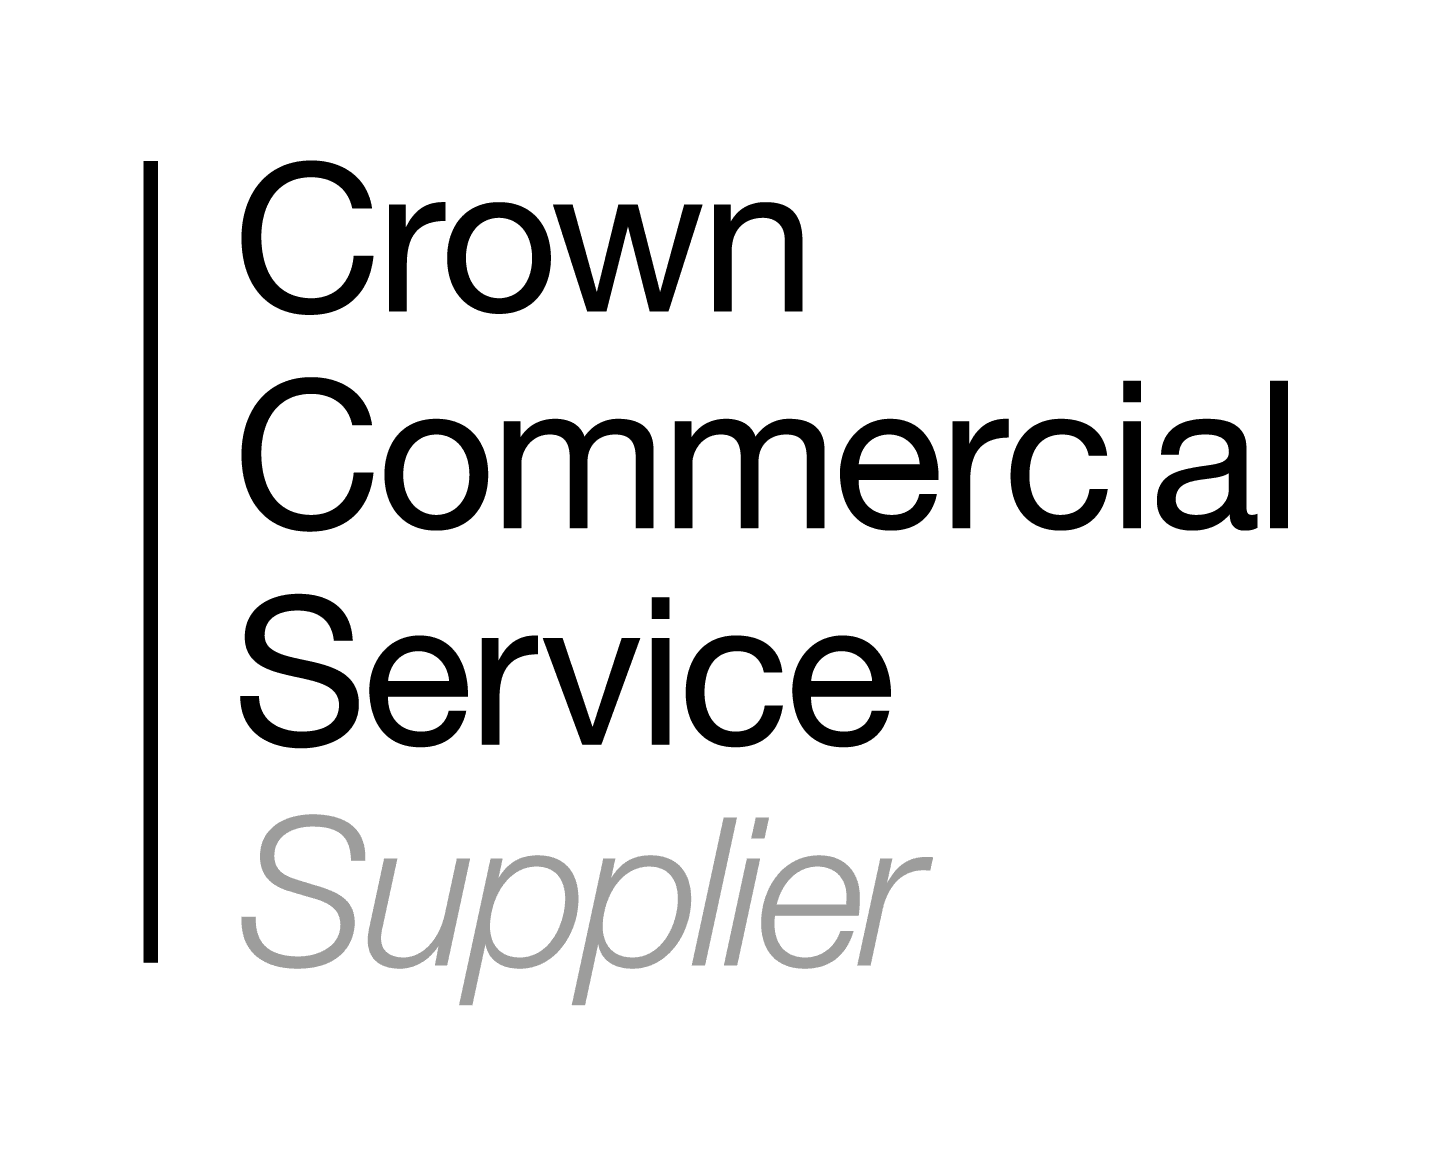 Logo depicting that Exception is a Crown Commercial Services Supplier